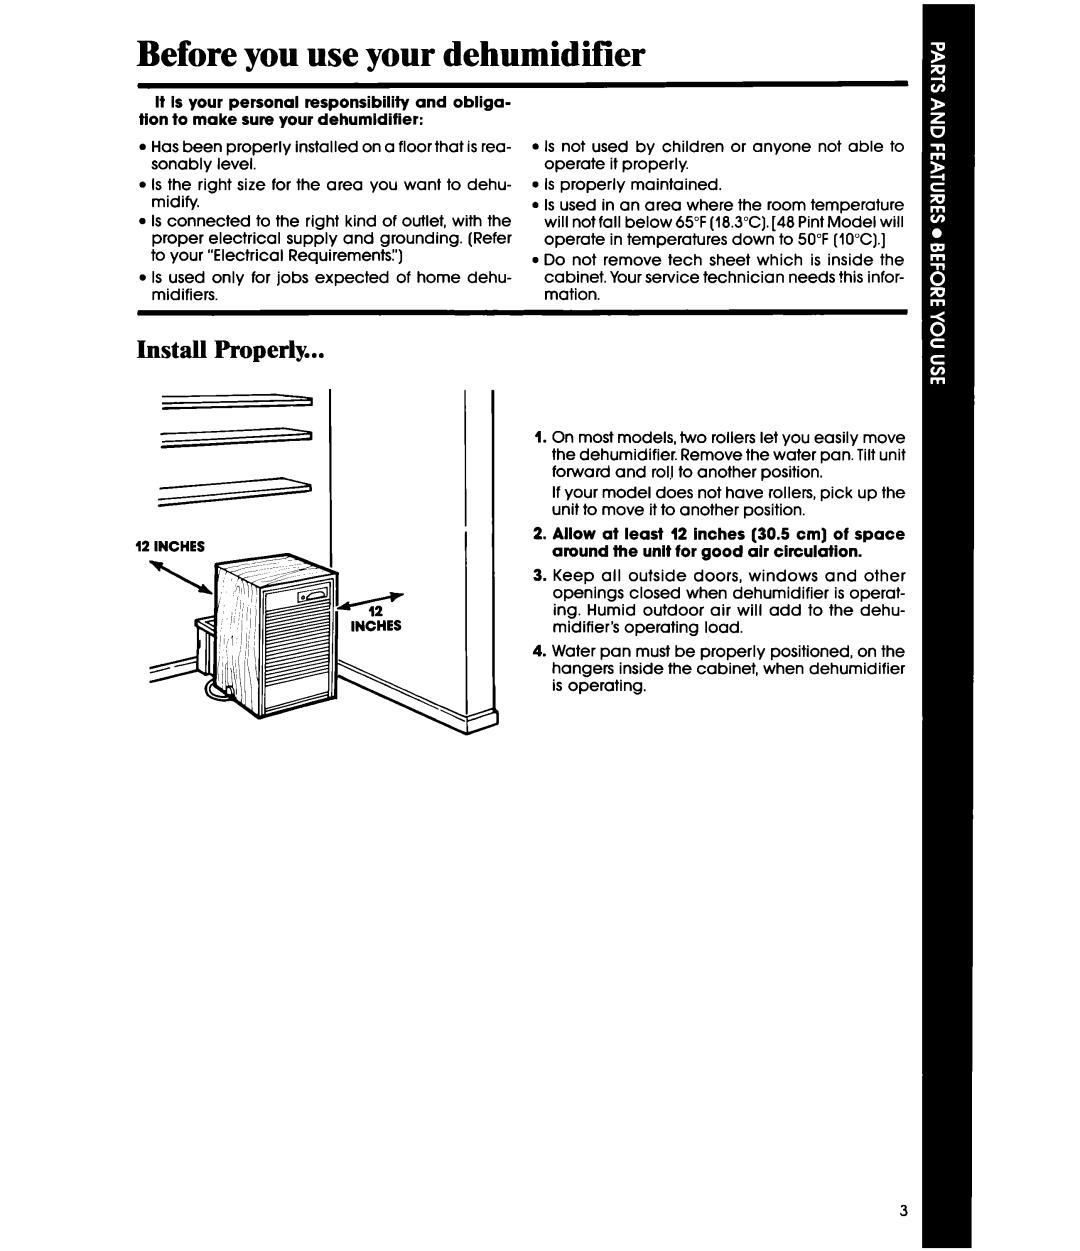 Whirlpool AD0402XM0 manual Before you use your dehumidifier, Install Properly 